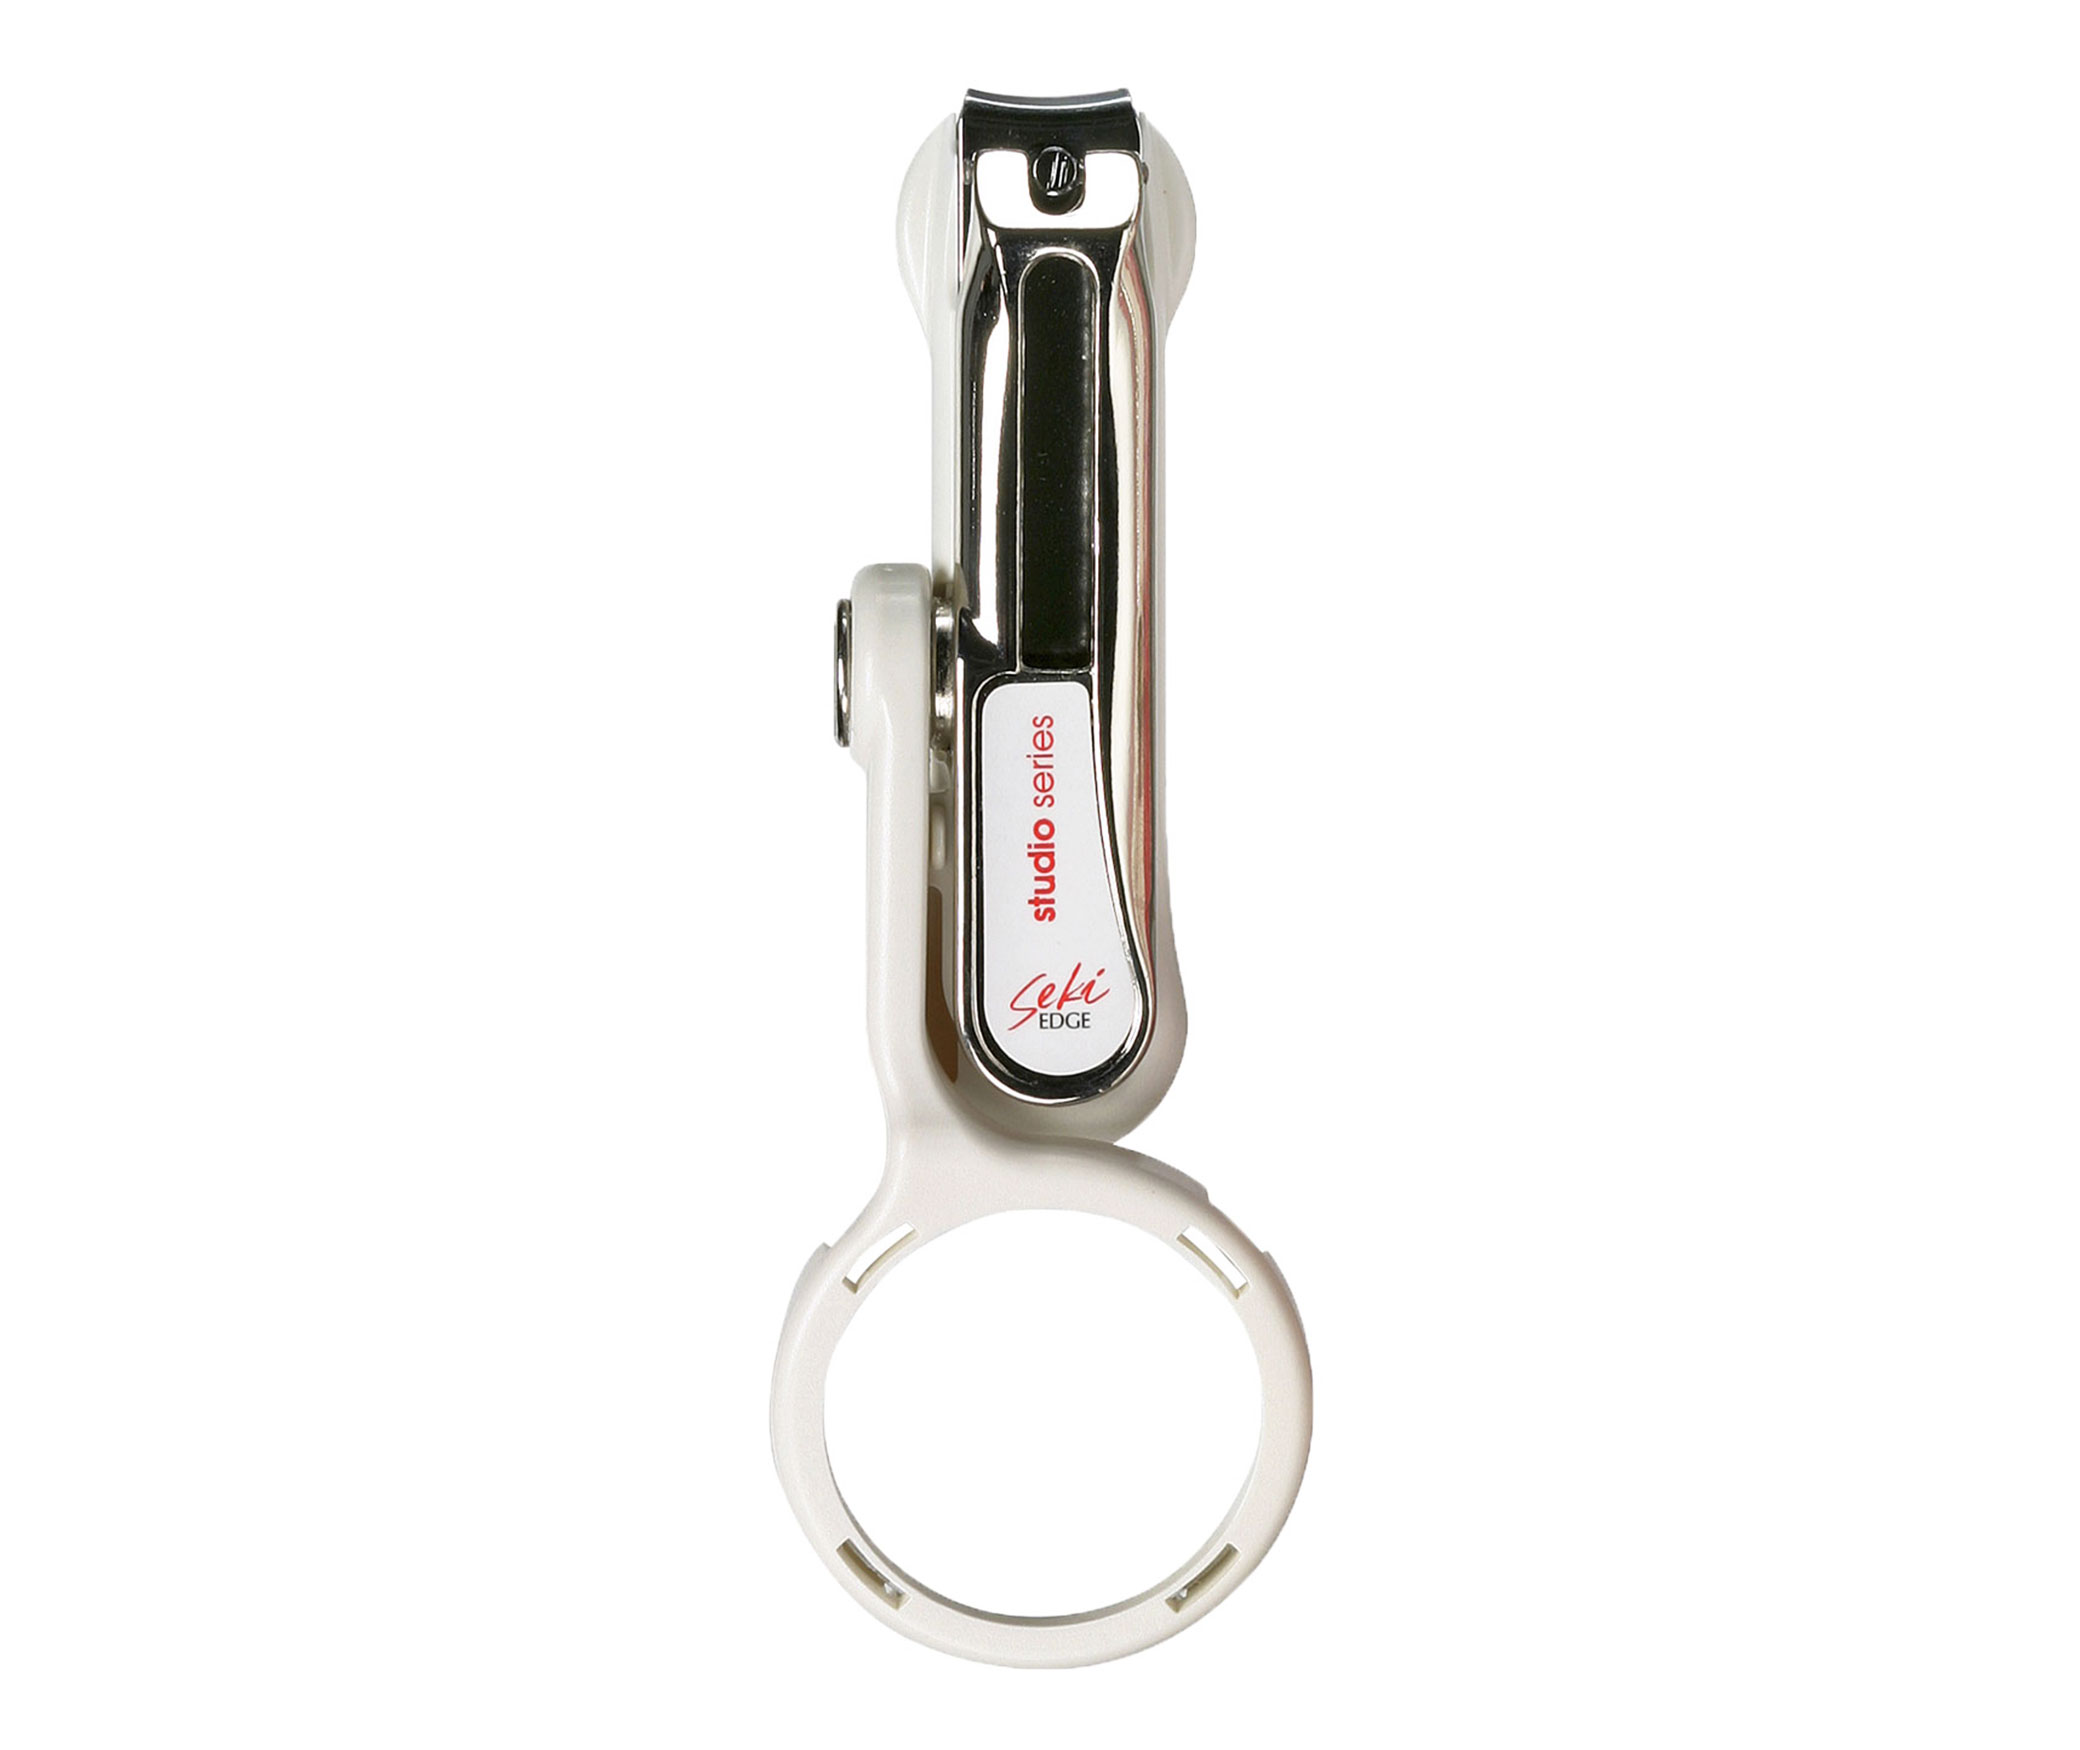 Chrome Plated Angled Toenail Clippers for Trimming Toenails & Giving  Pedicures 